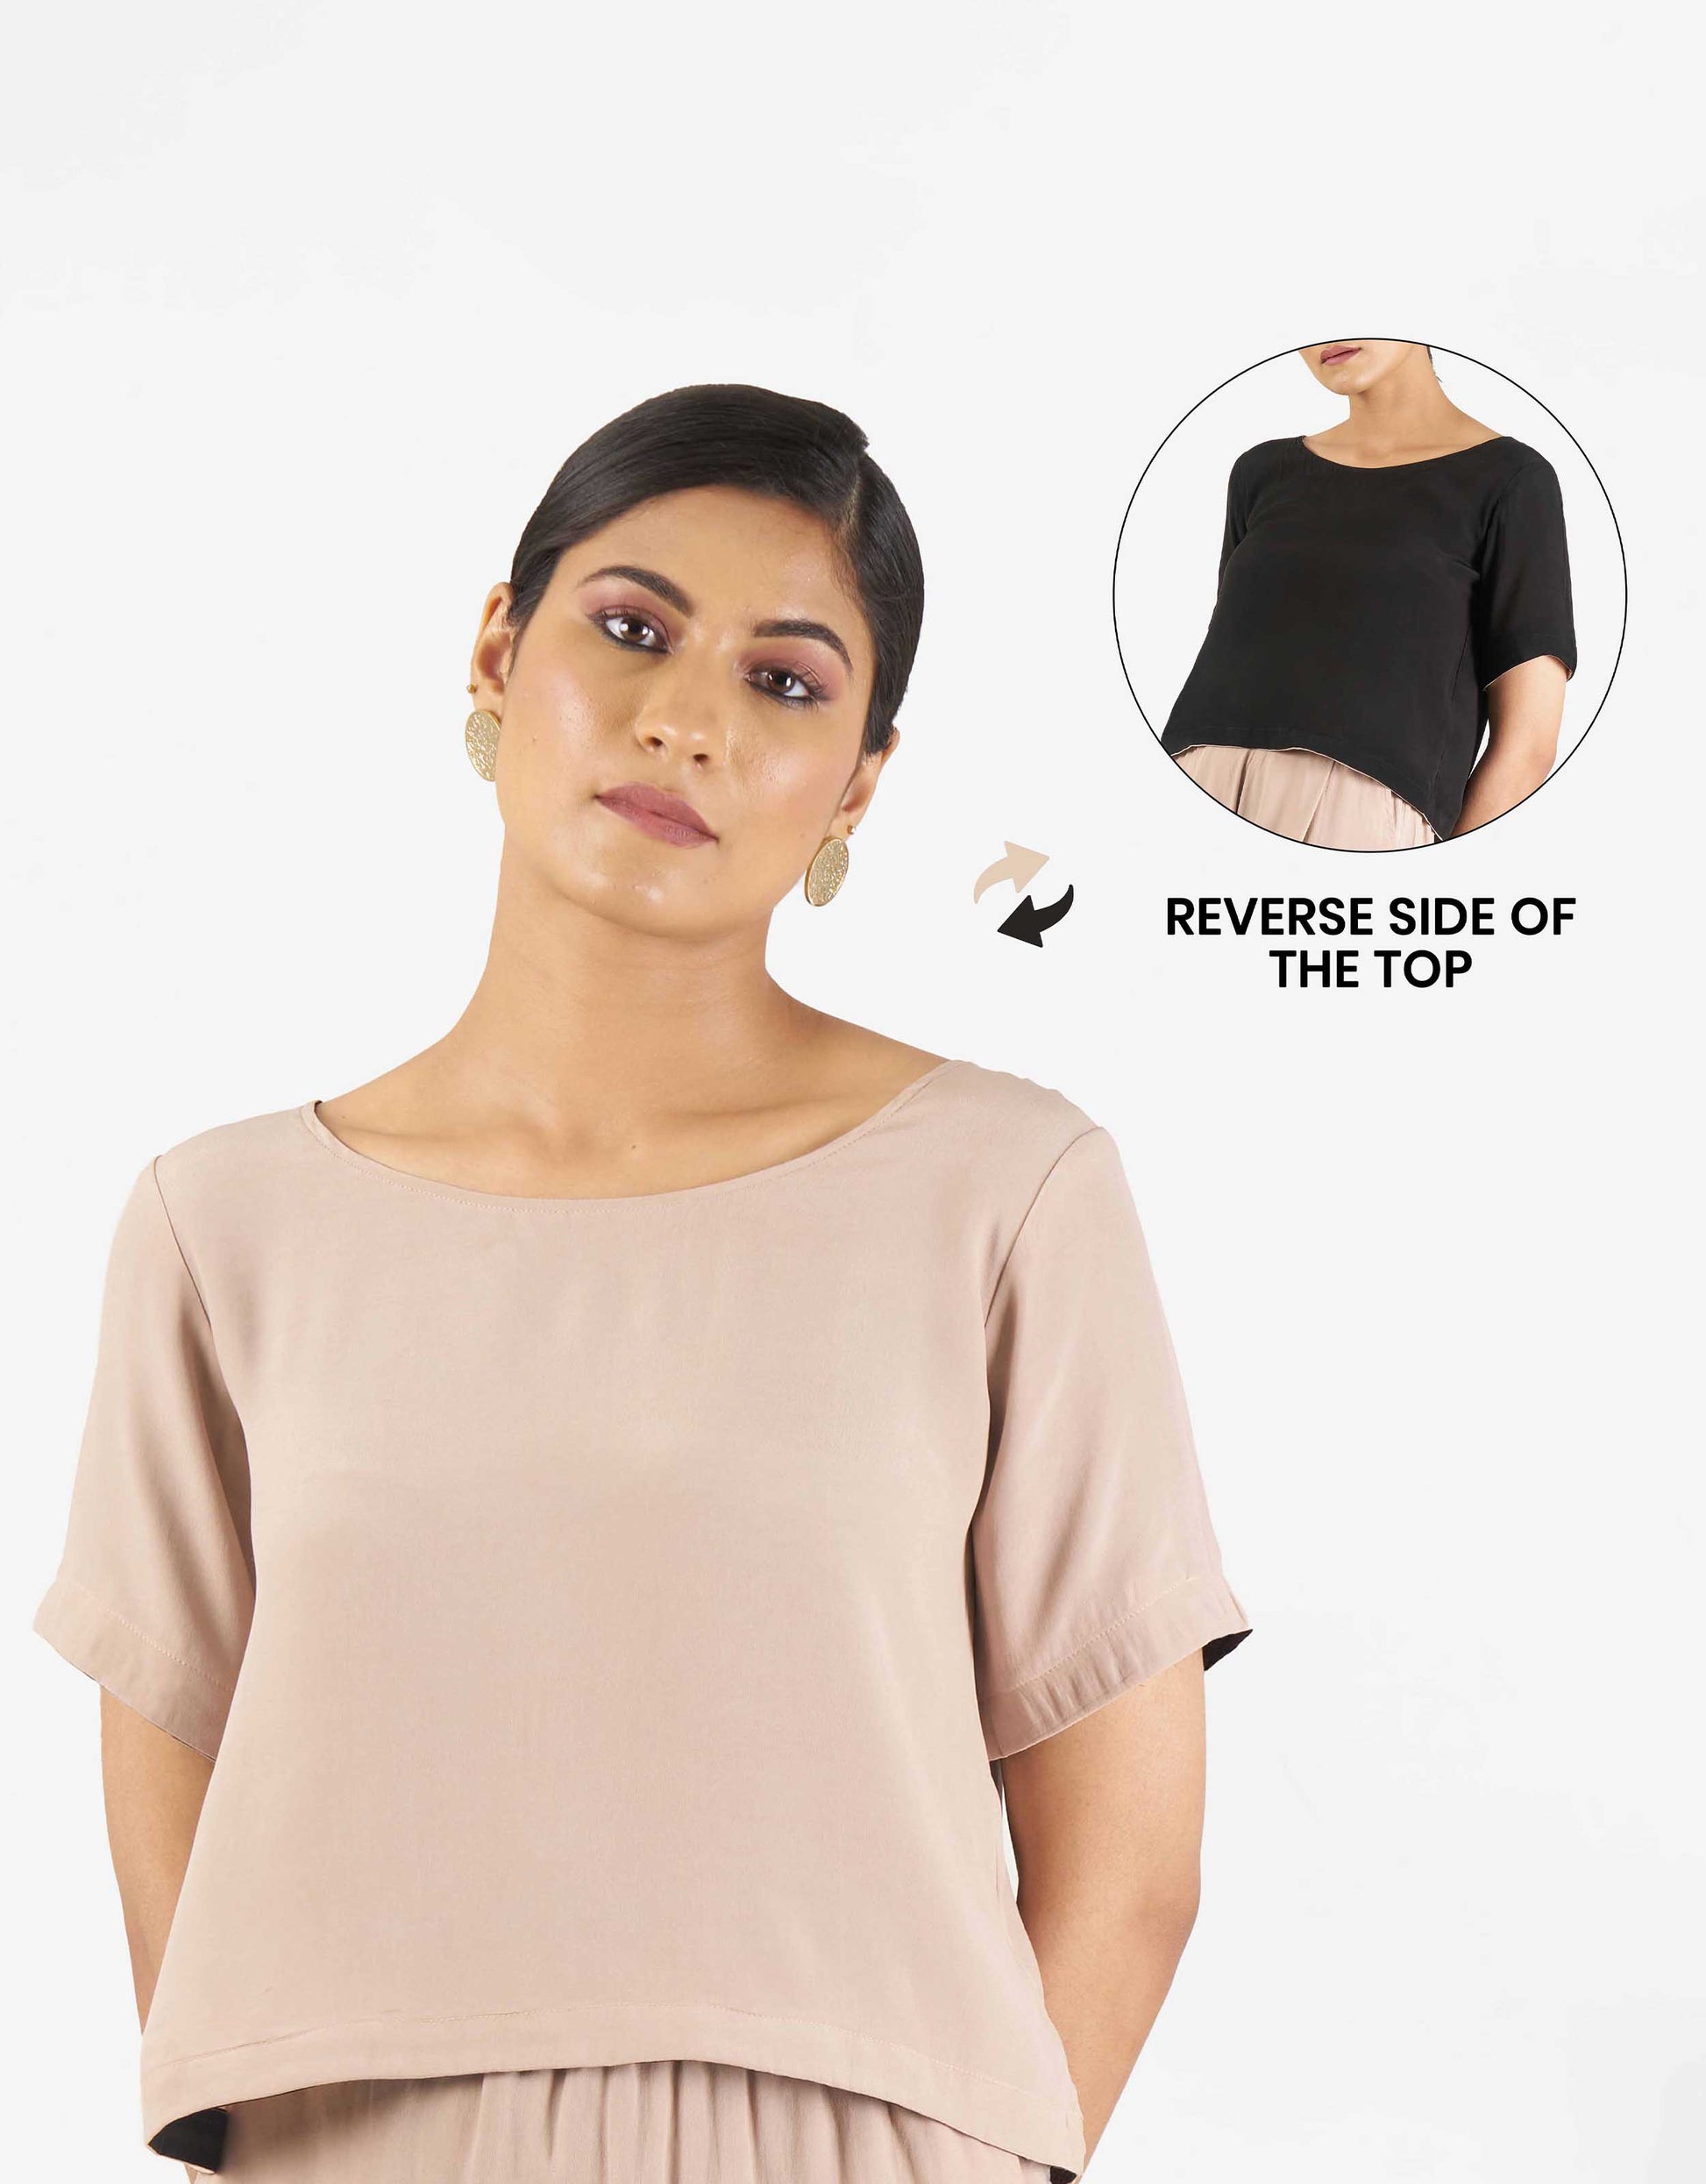 Front view of Hueloom's Reversible Top in black with champagne reverse side.